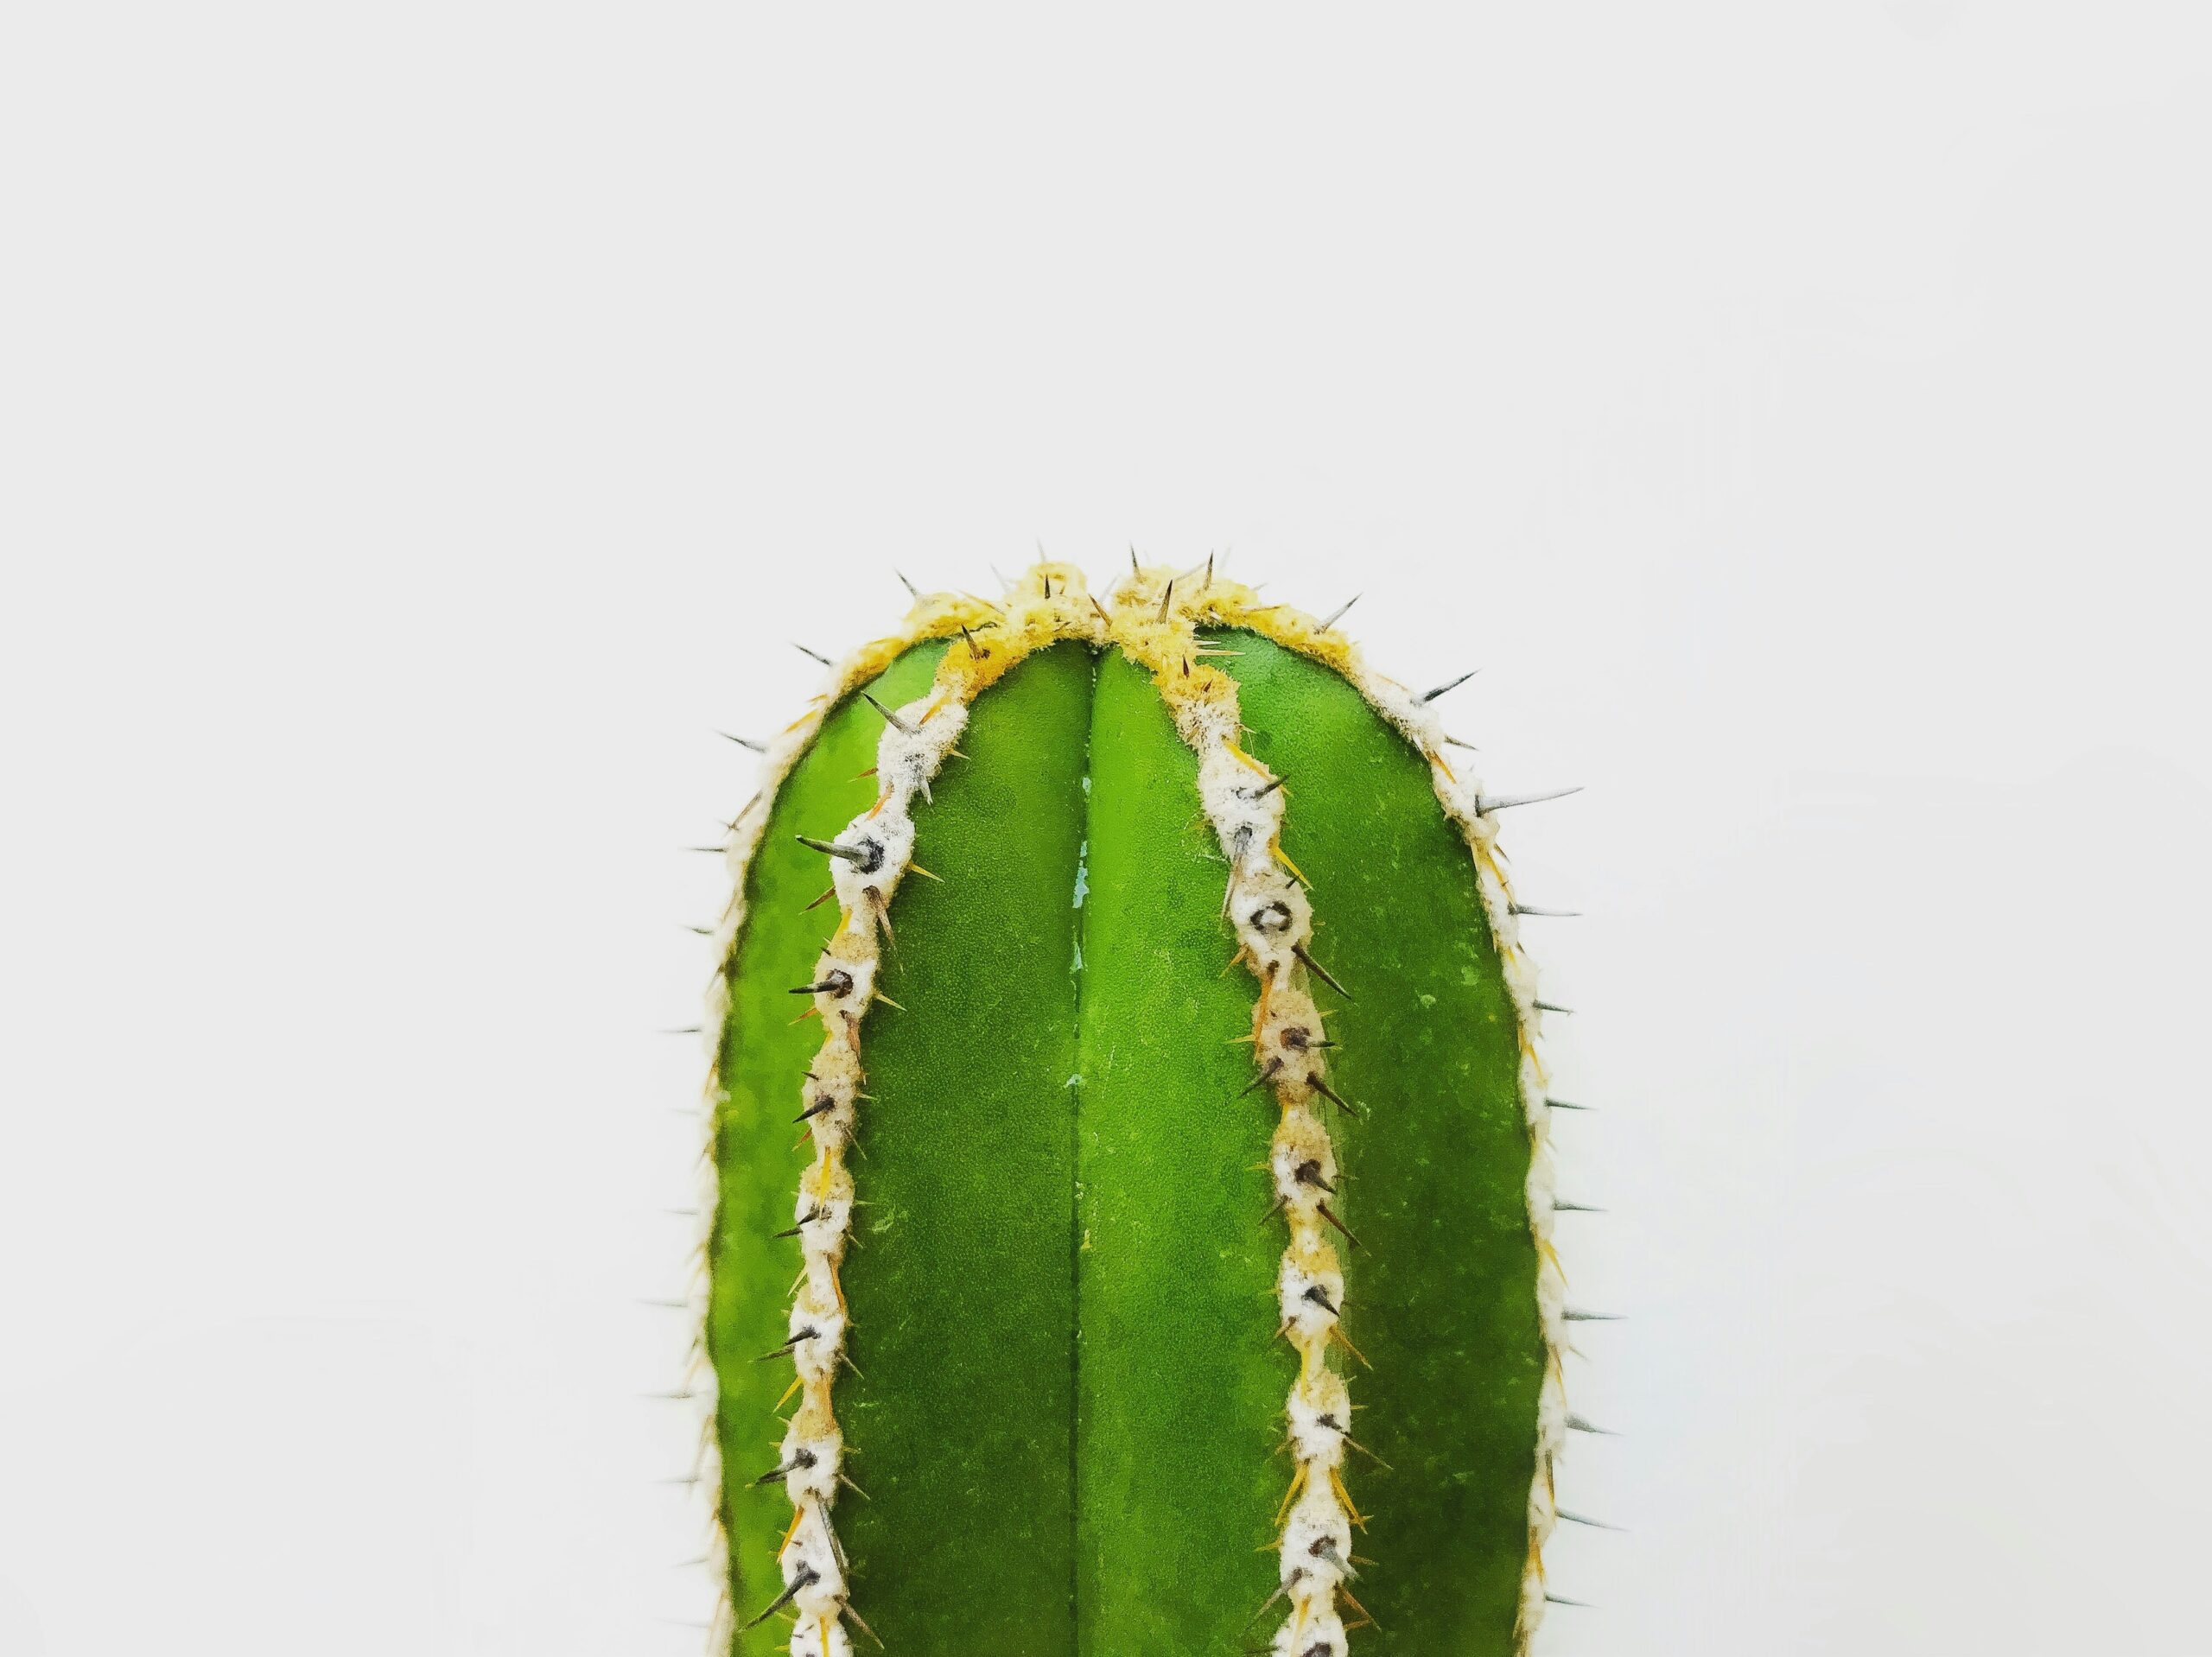 What Research Has Been Done On Nopal’s Impact On Mood And Stress?